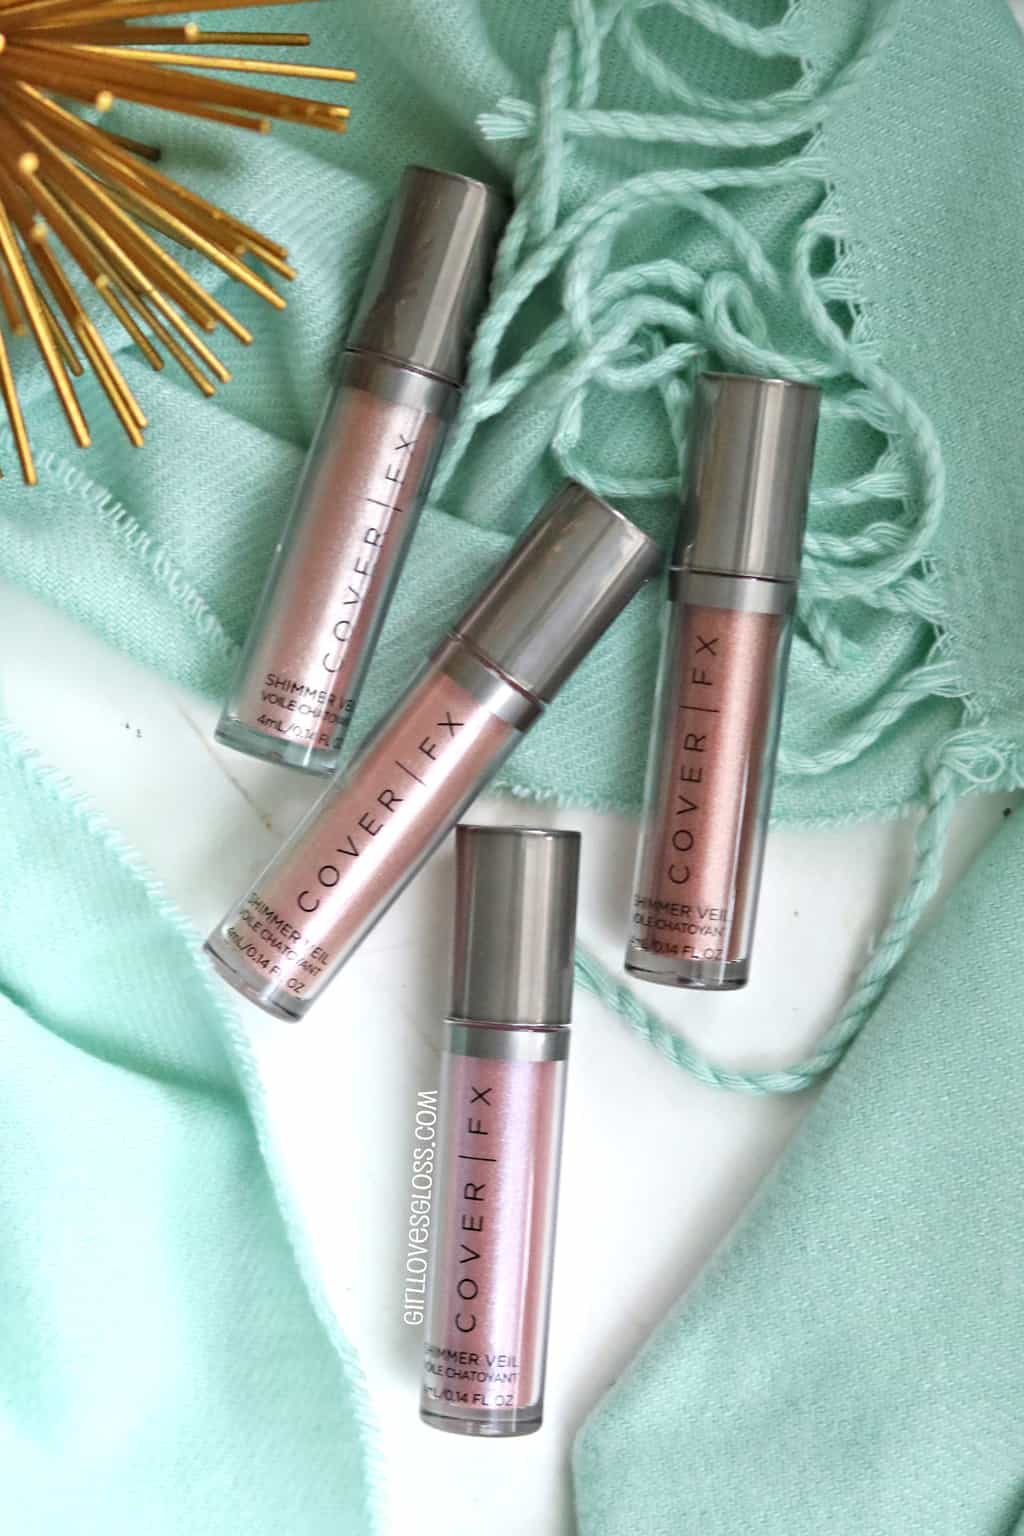 CoverFx Shimmer Veils and Glitter Drops Review